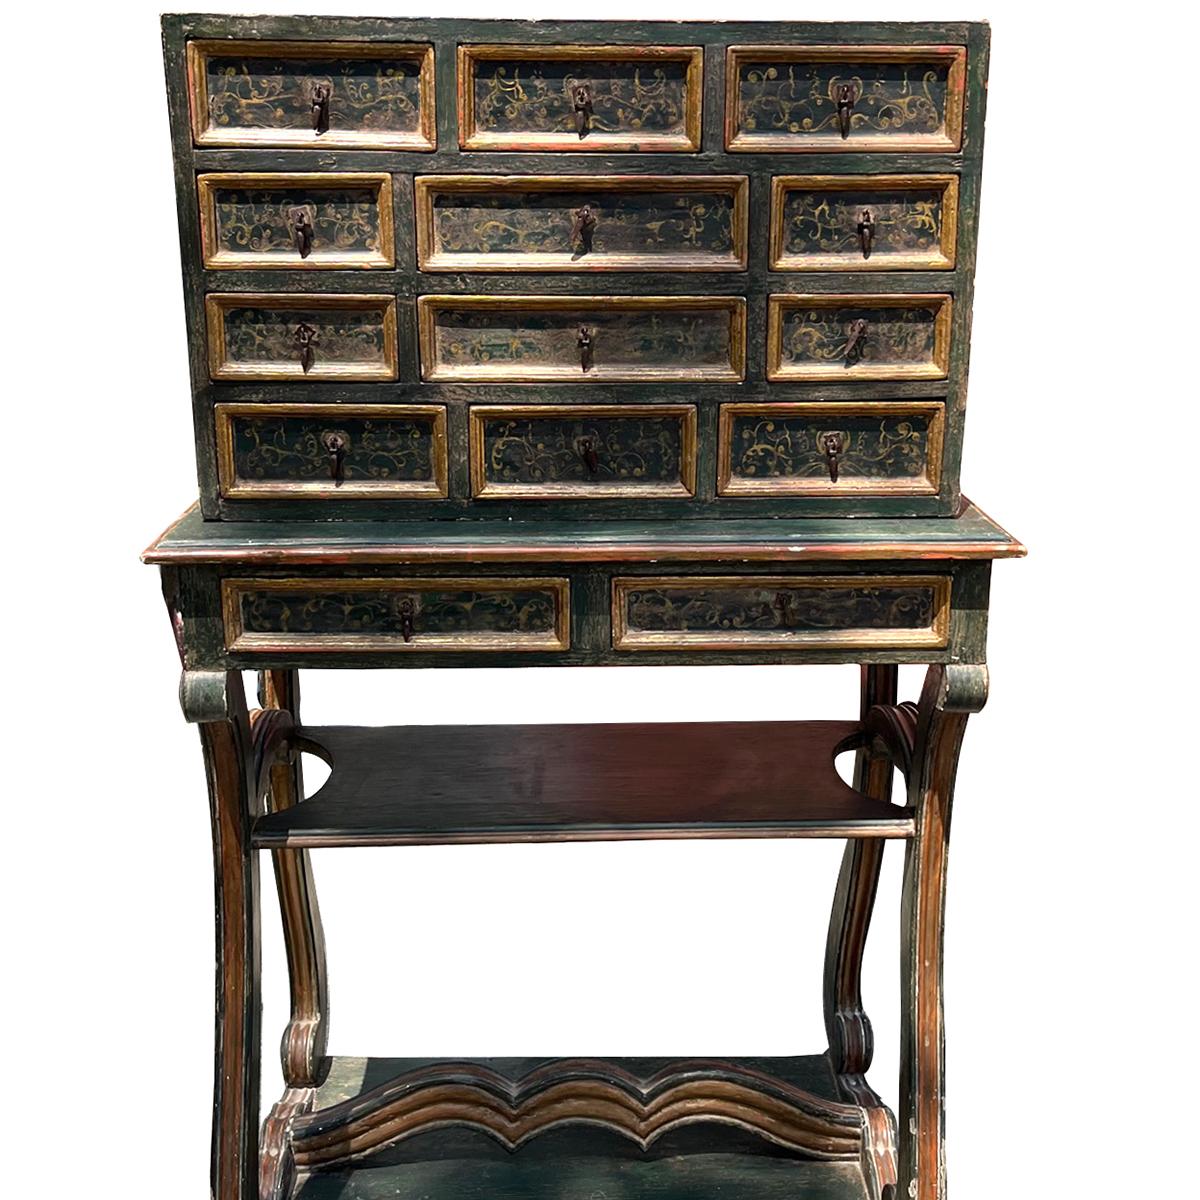 A circa 1920's Spanish painted and gilt wood cabinet with 14 drawers.

Measurements:
Height: 51.5